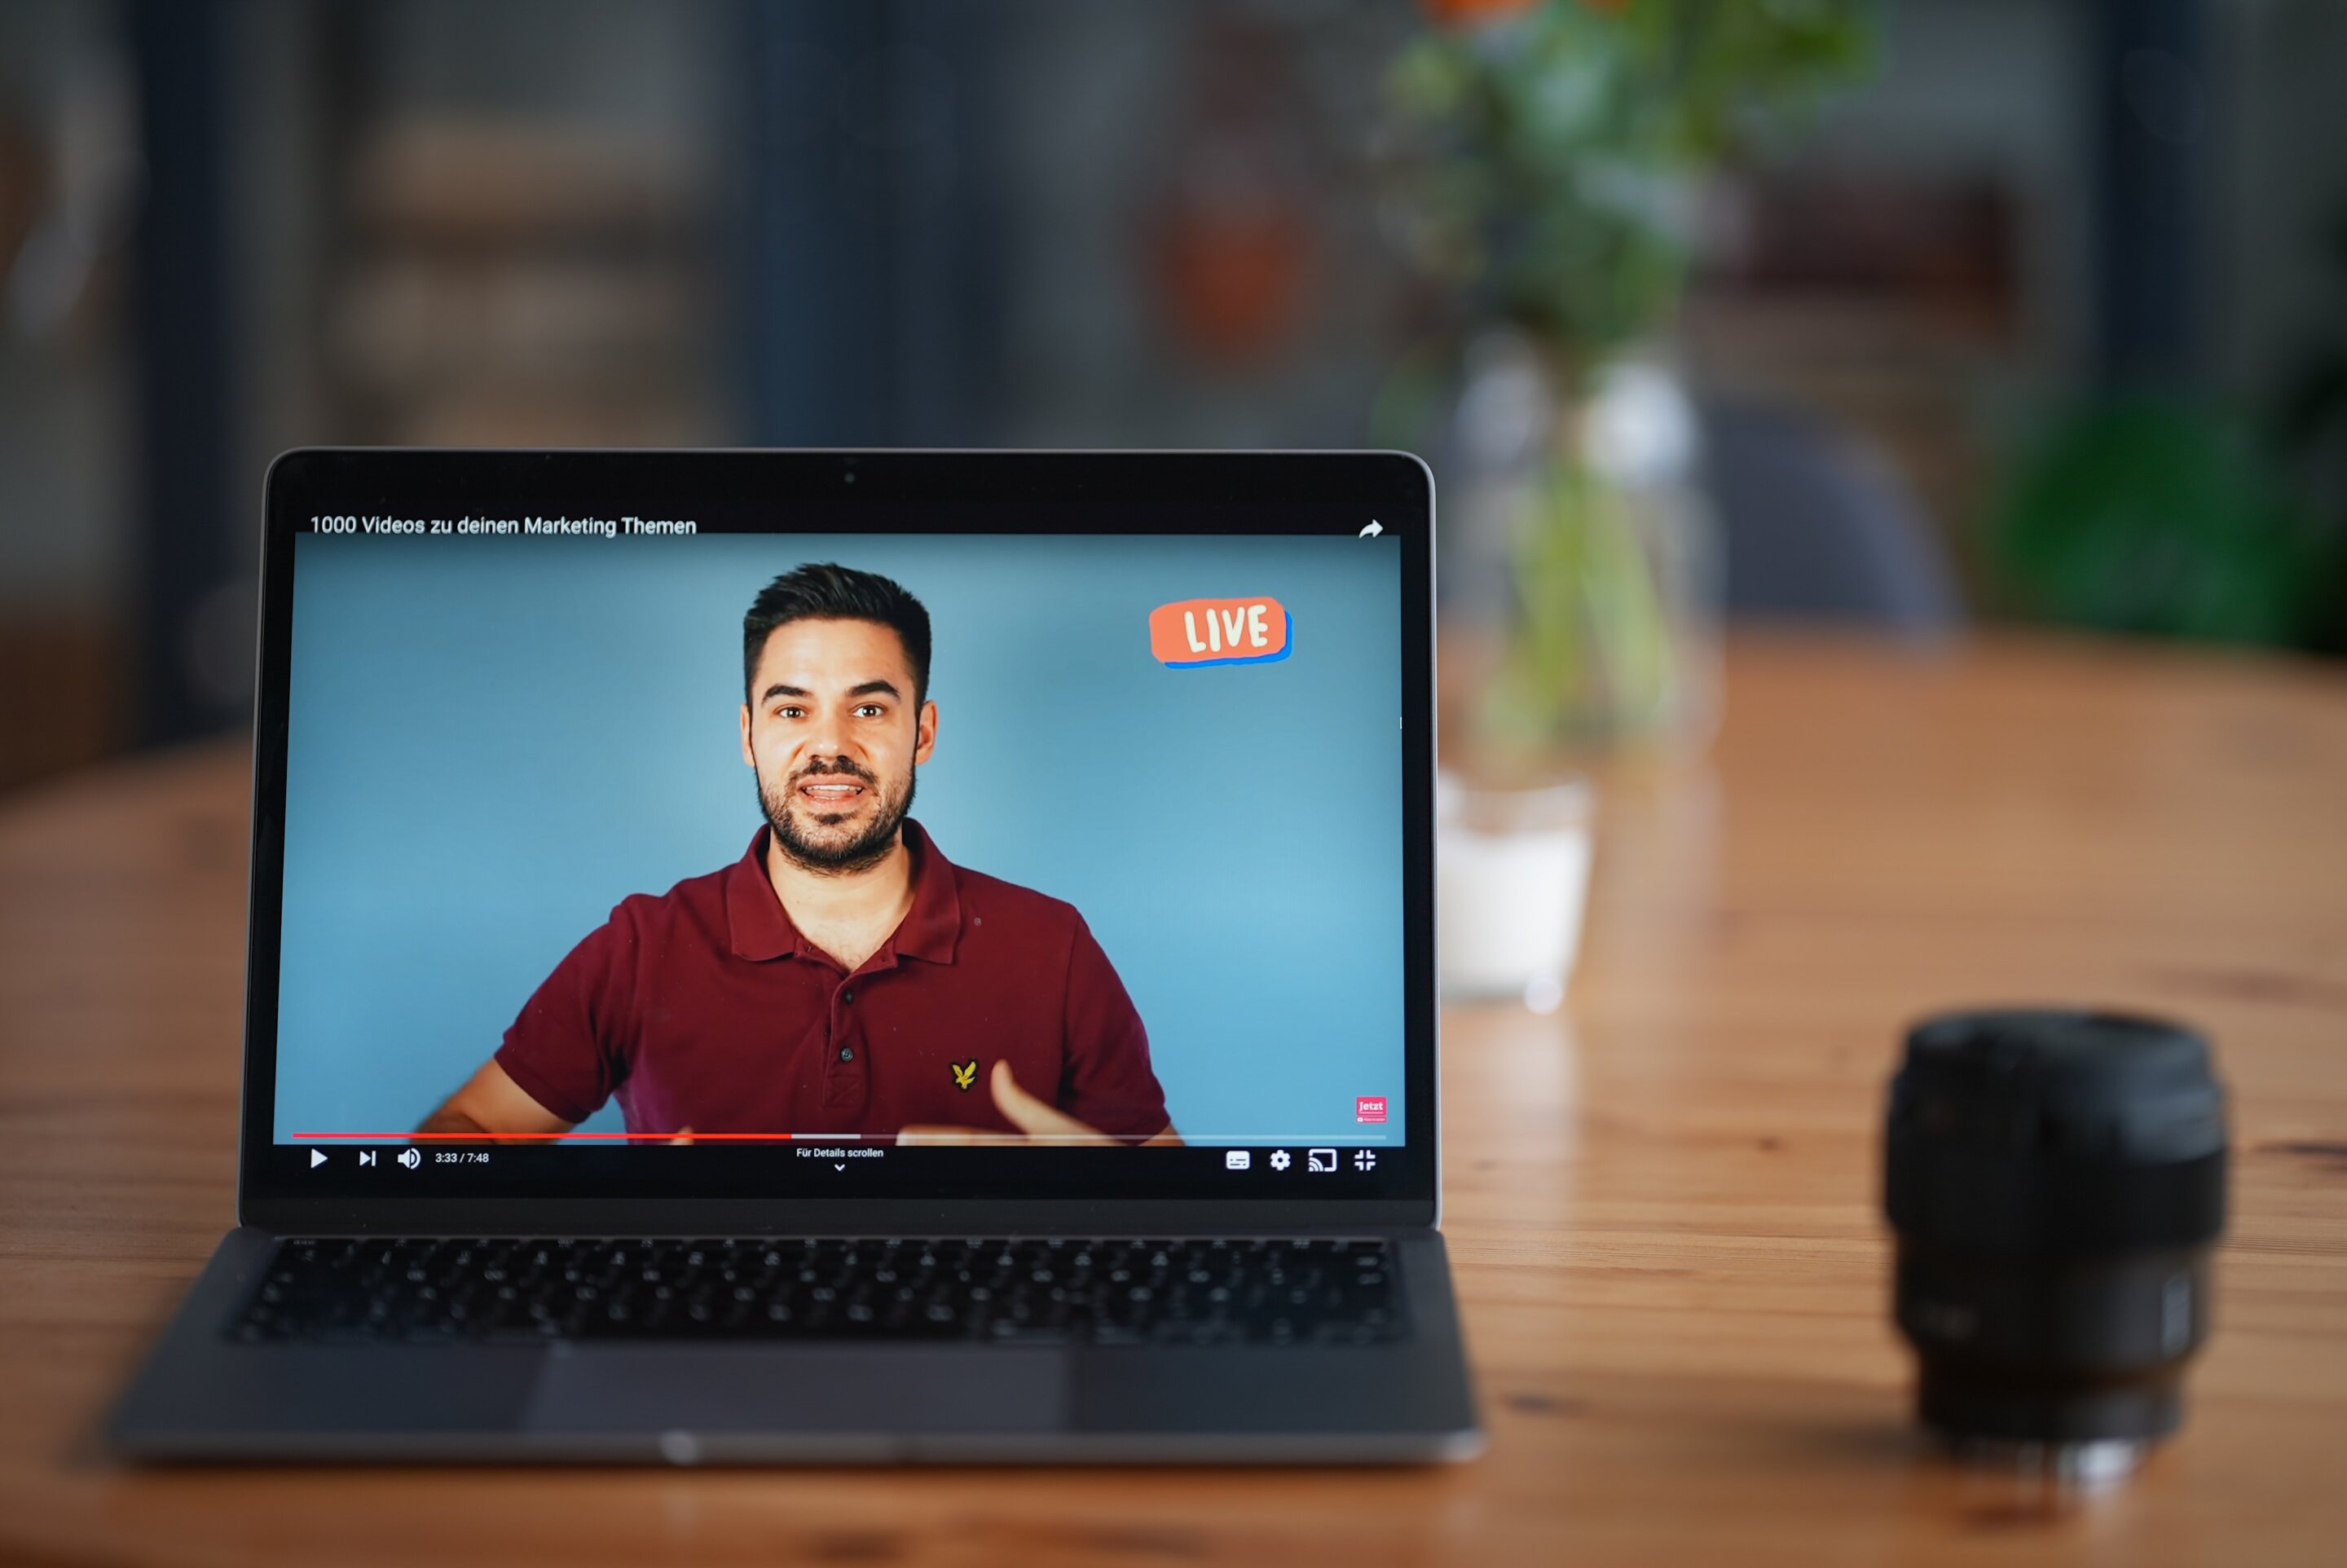 ‘Crowding out’ the competition: Study reveals surprising livestream chatting and tipping behavior